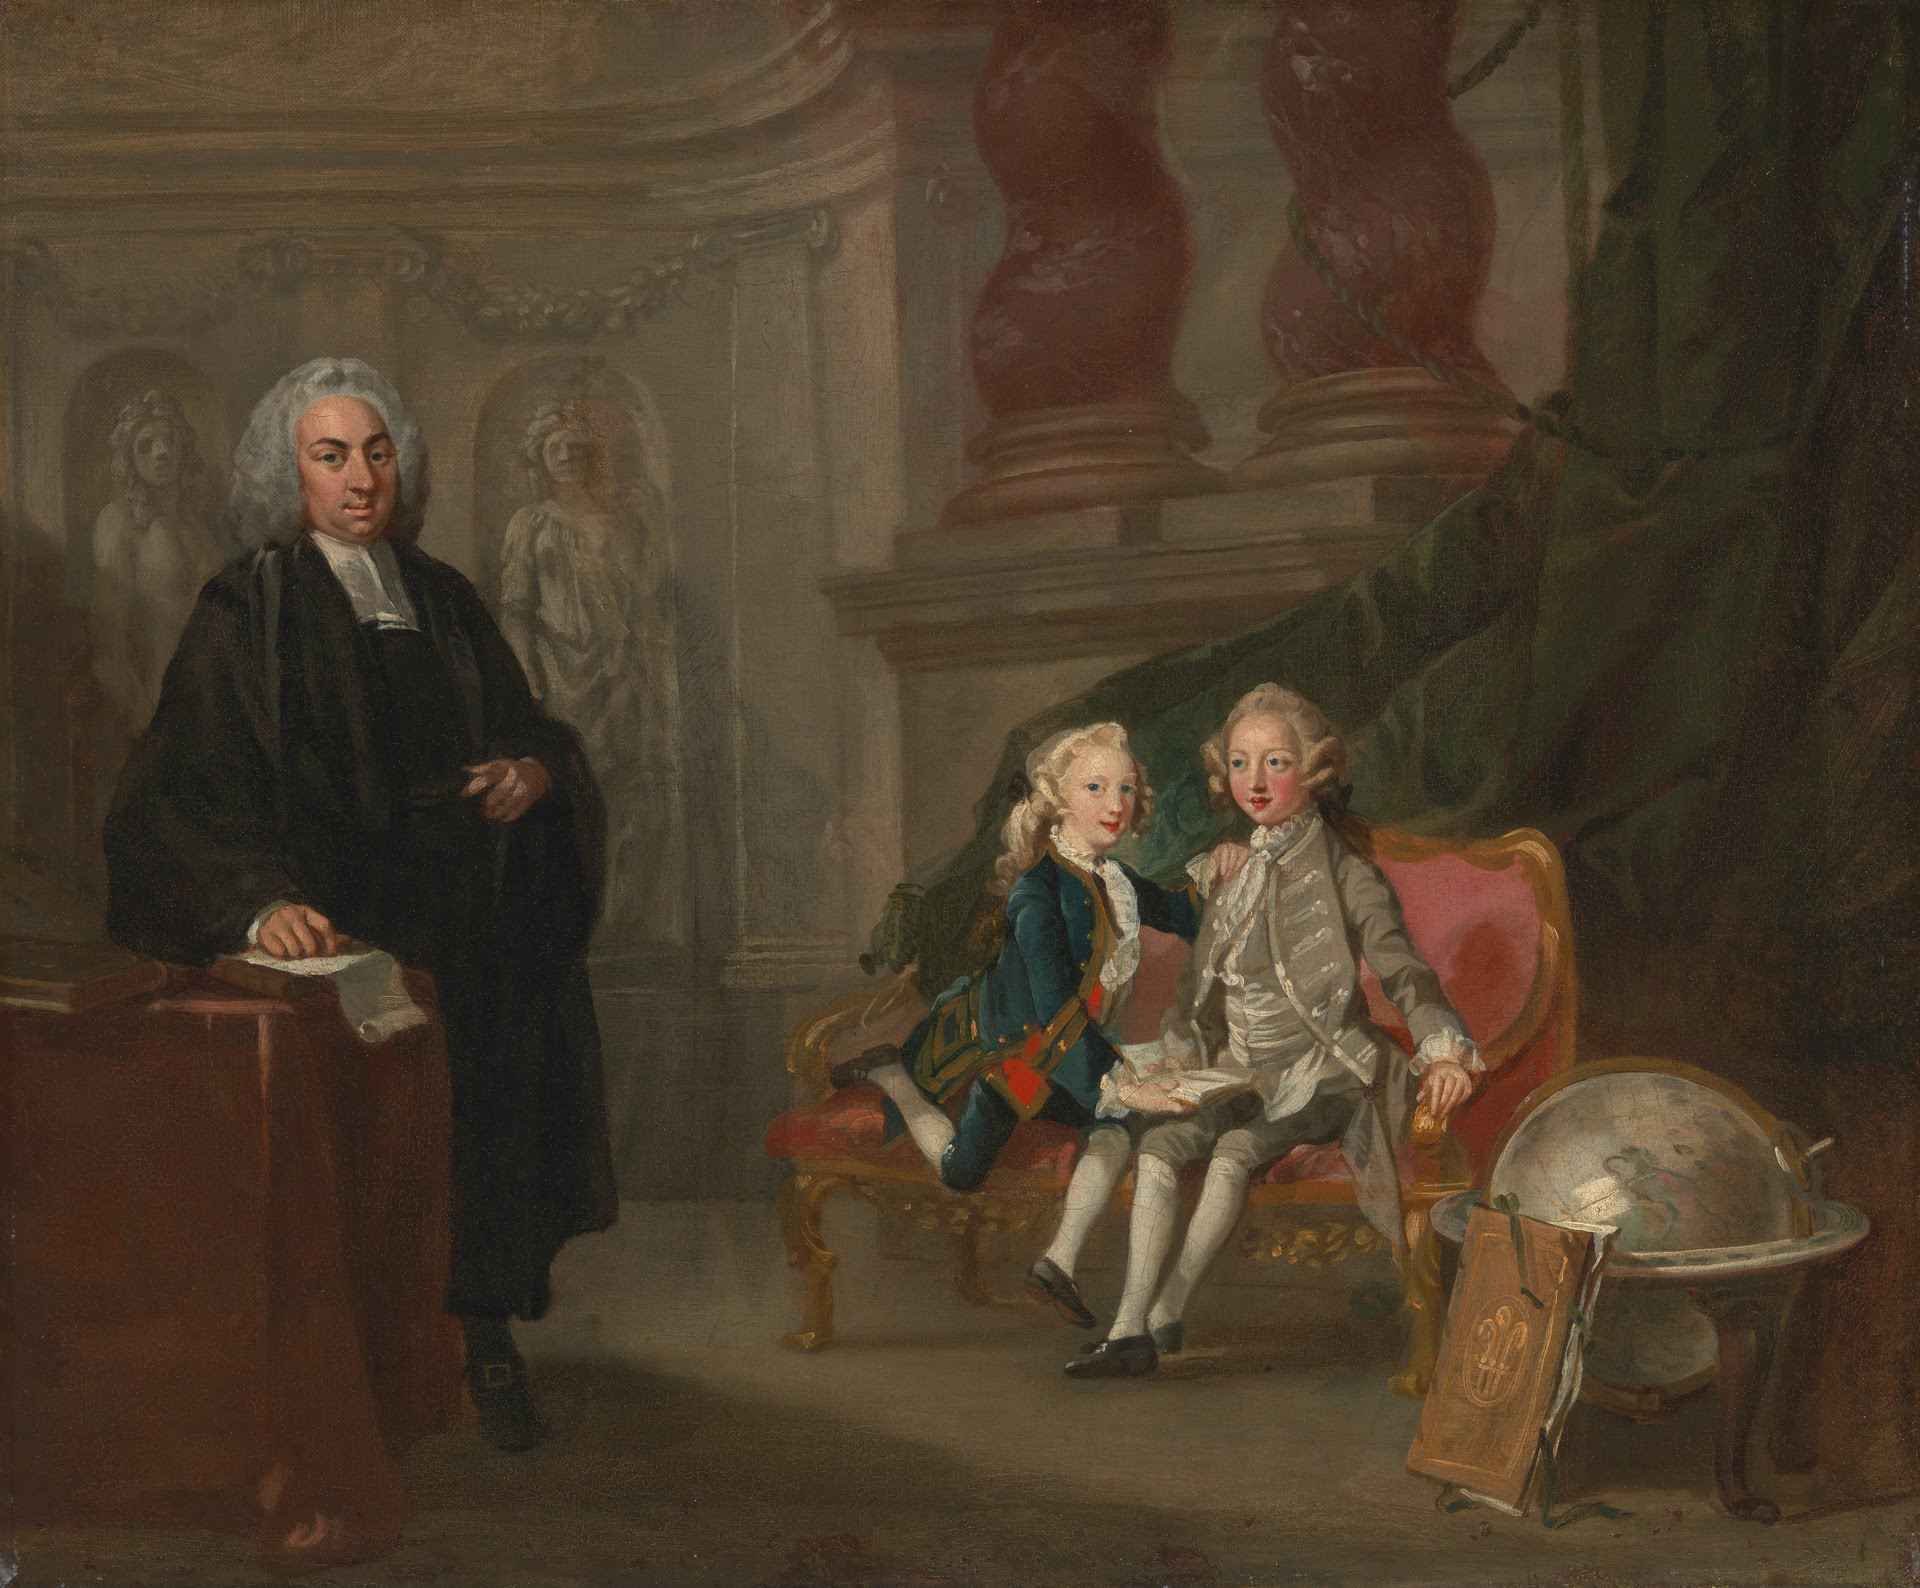 Prince George and Prince Edward Augustus with their tutor Dr. Francis Ayscough